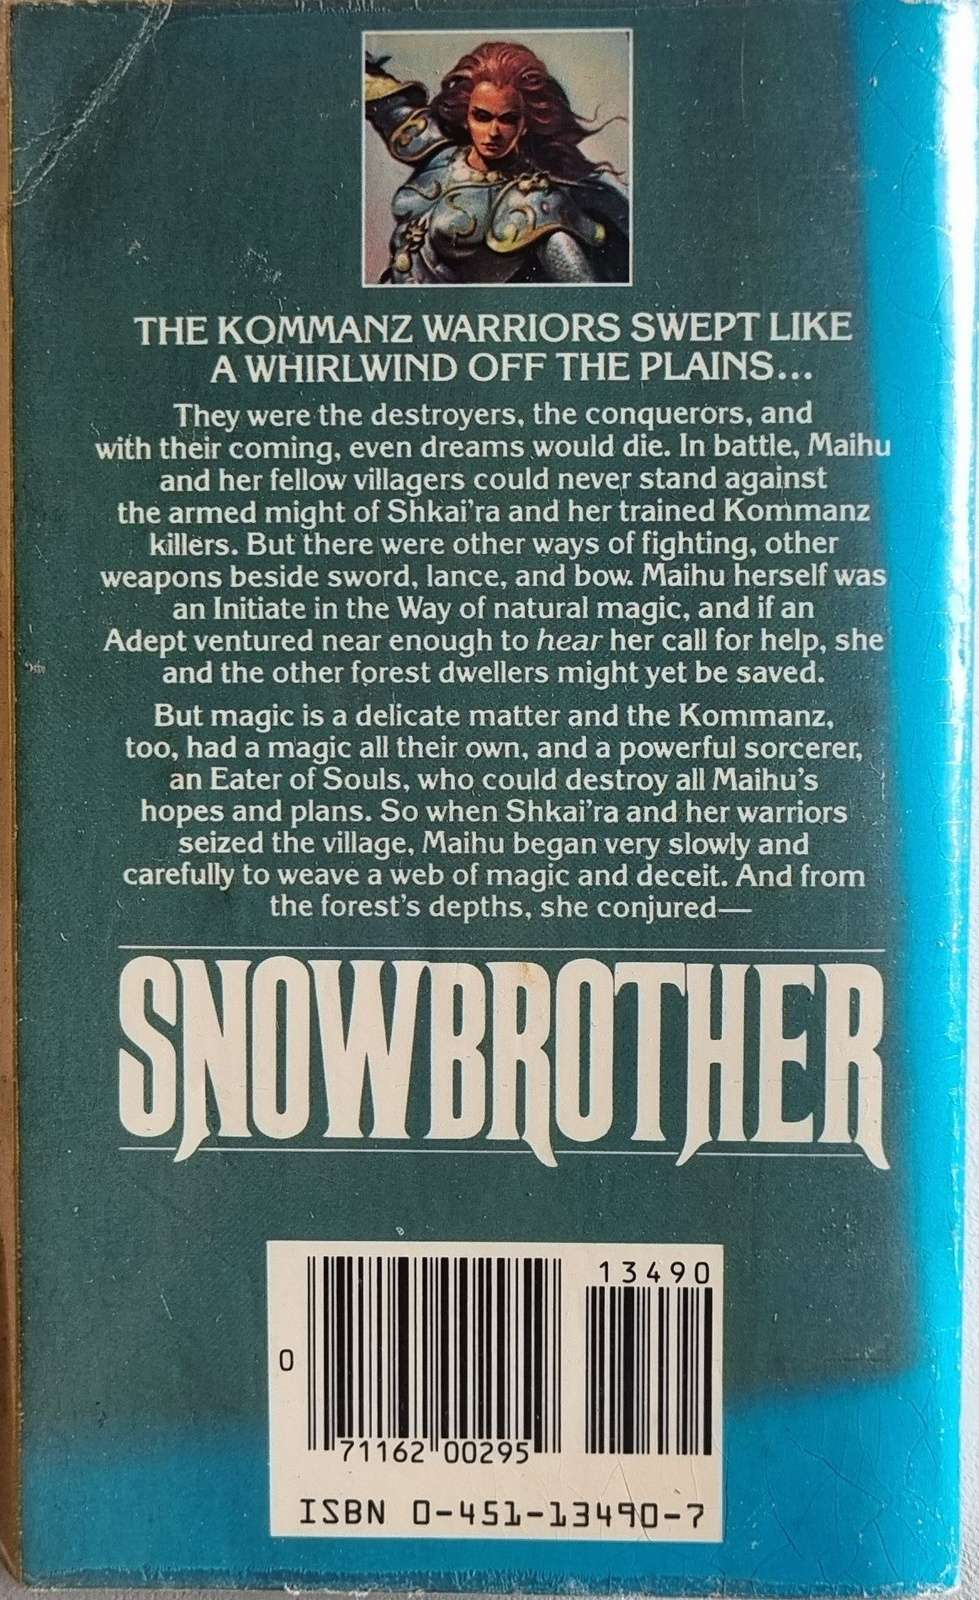 Snowbrother - S.M. Stirling